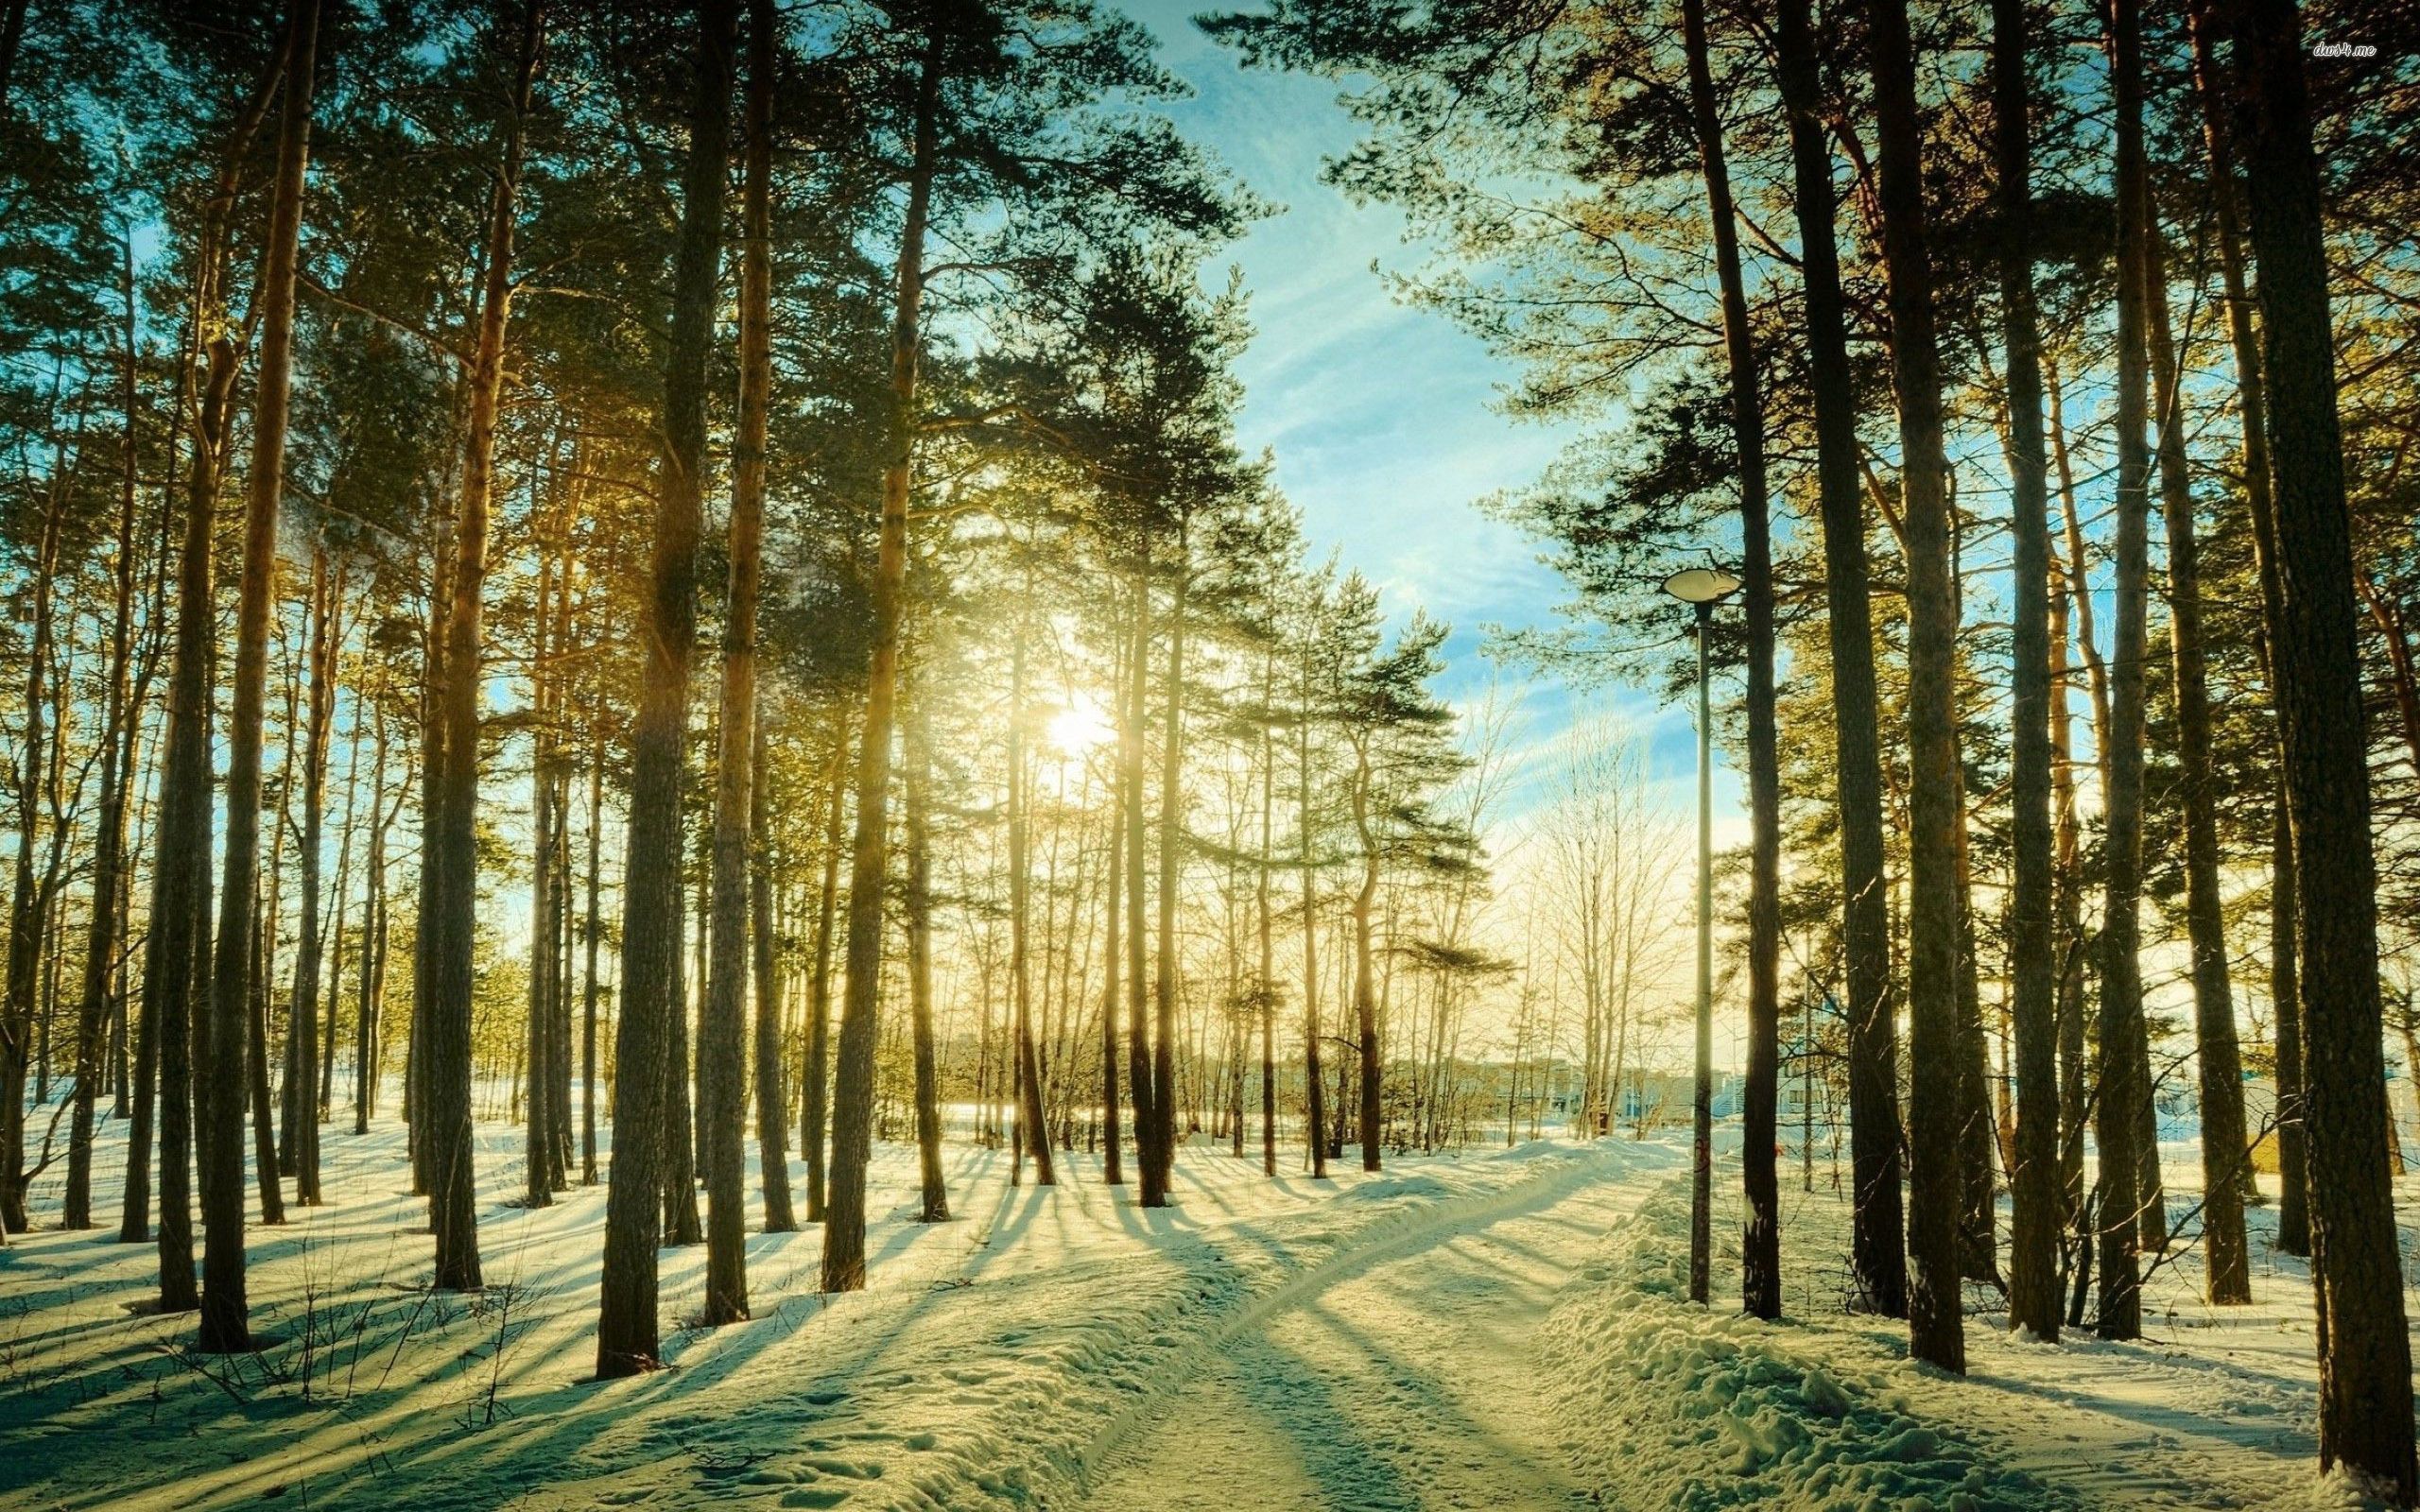 Sunny day in the snowy forest wallpaper wallpaper